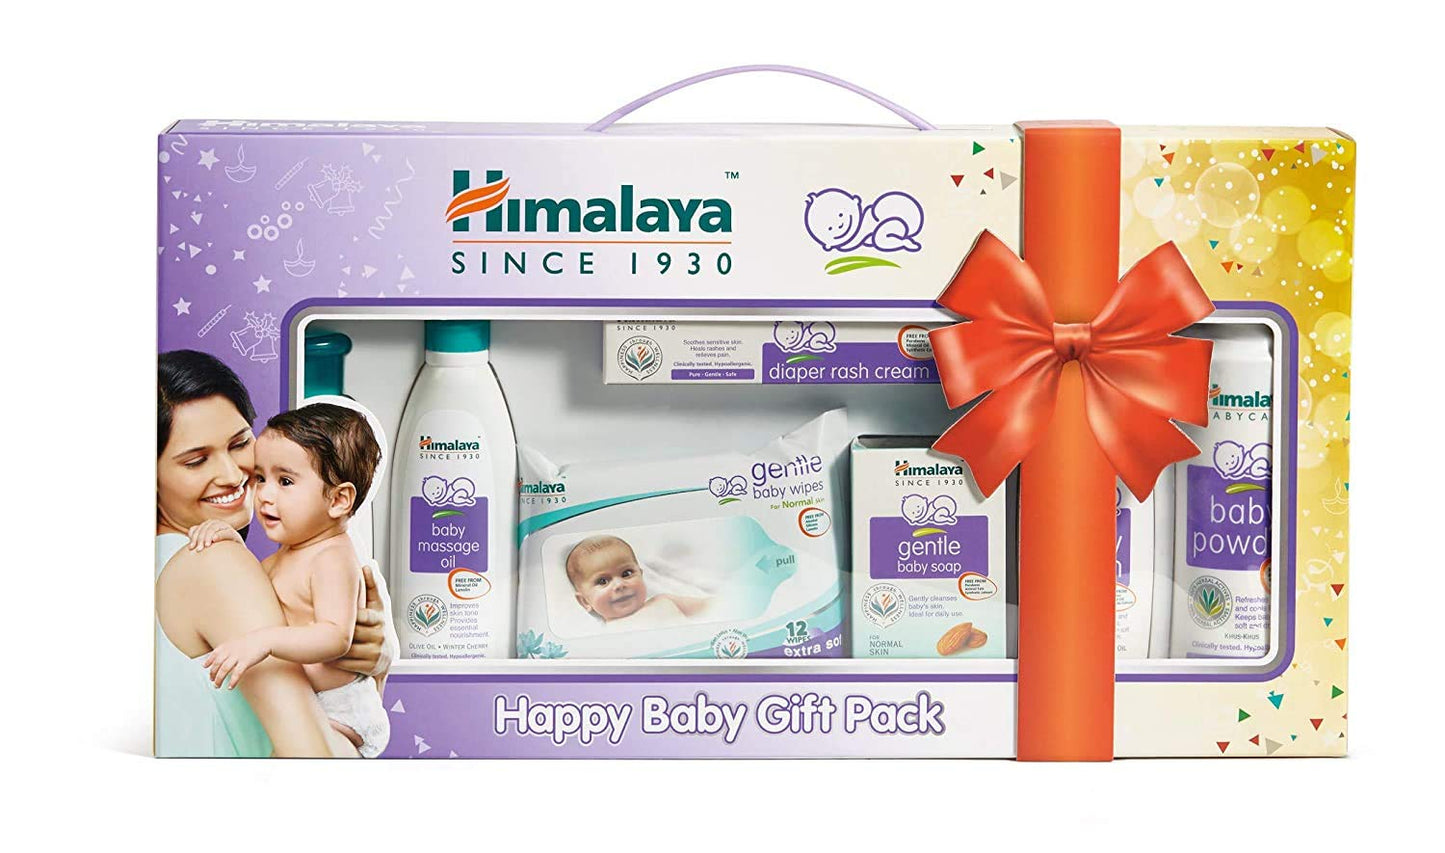 HAPPY BABY GIFT PACK 525RS HIM 1 PCS